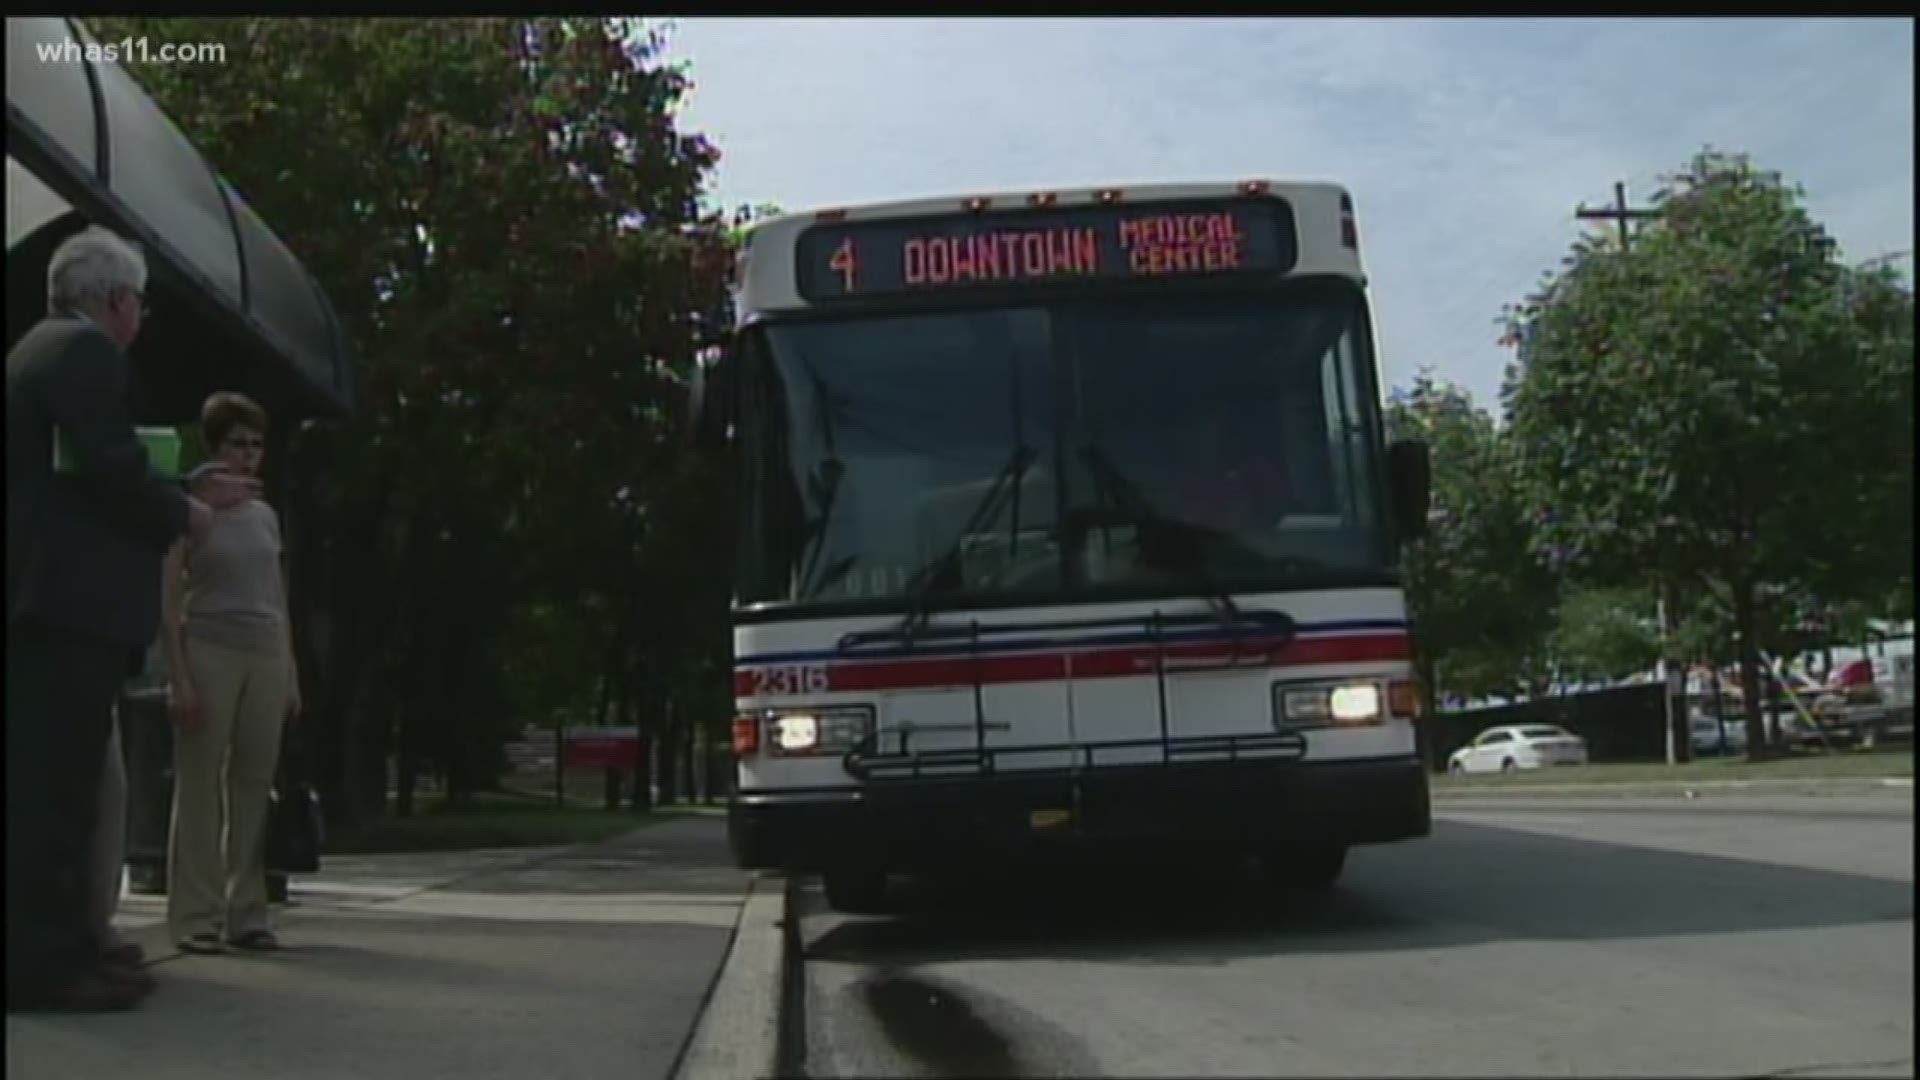 The program is limited to certain buses on Route 4, but you could get free bus fare by using the TARC app.